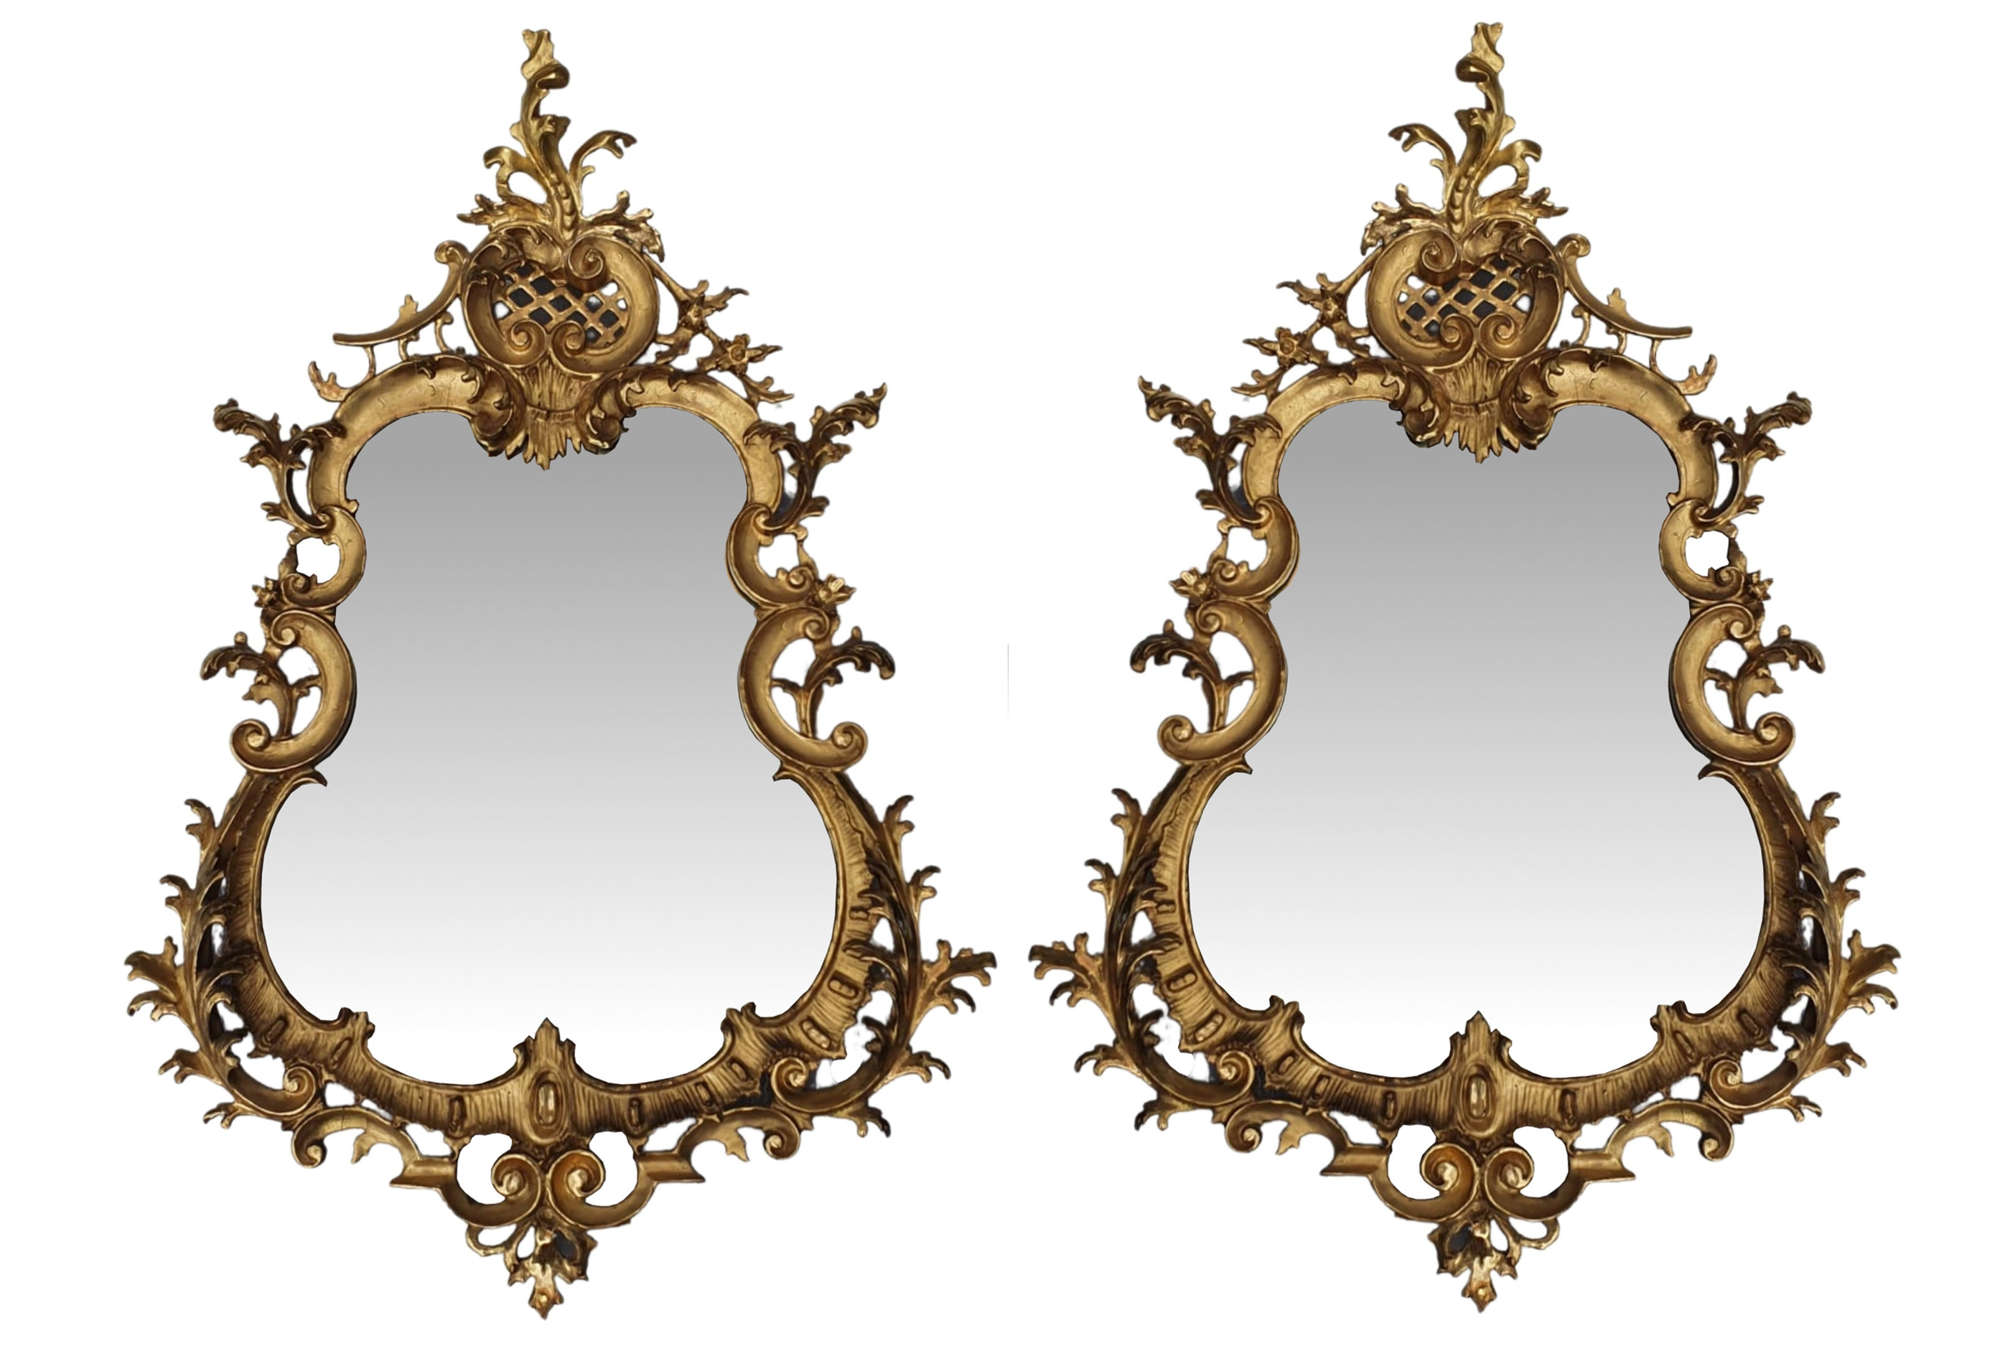 Rare Pair Of 19th Century Pier Giltwood Antique Mirrors In The Rococo Manner